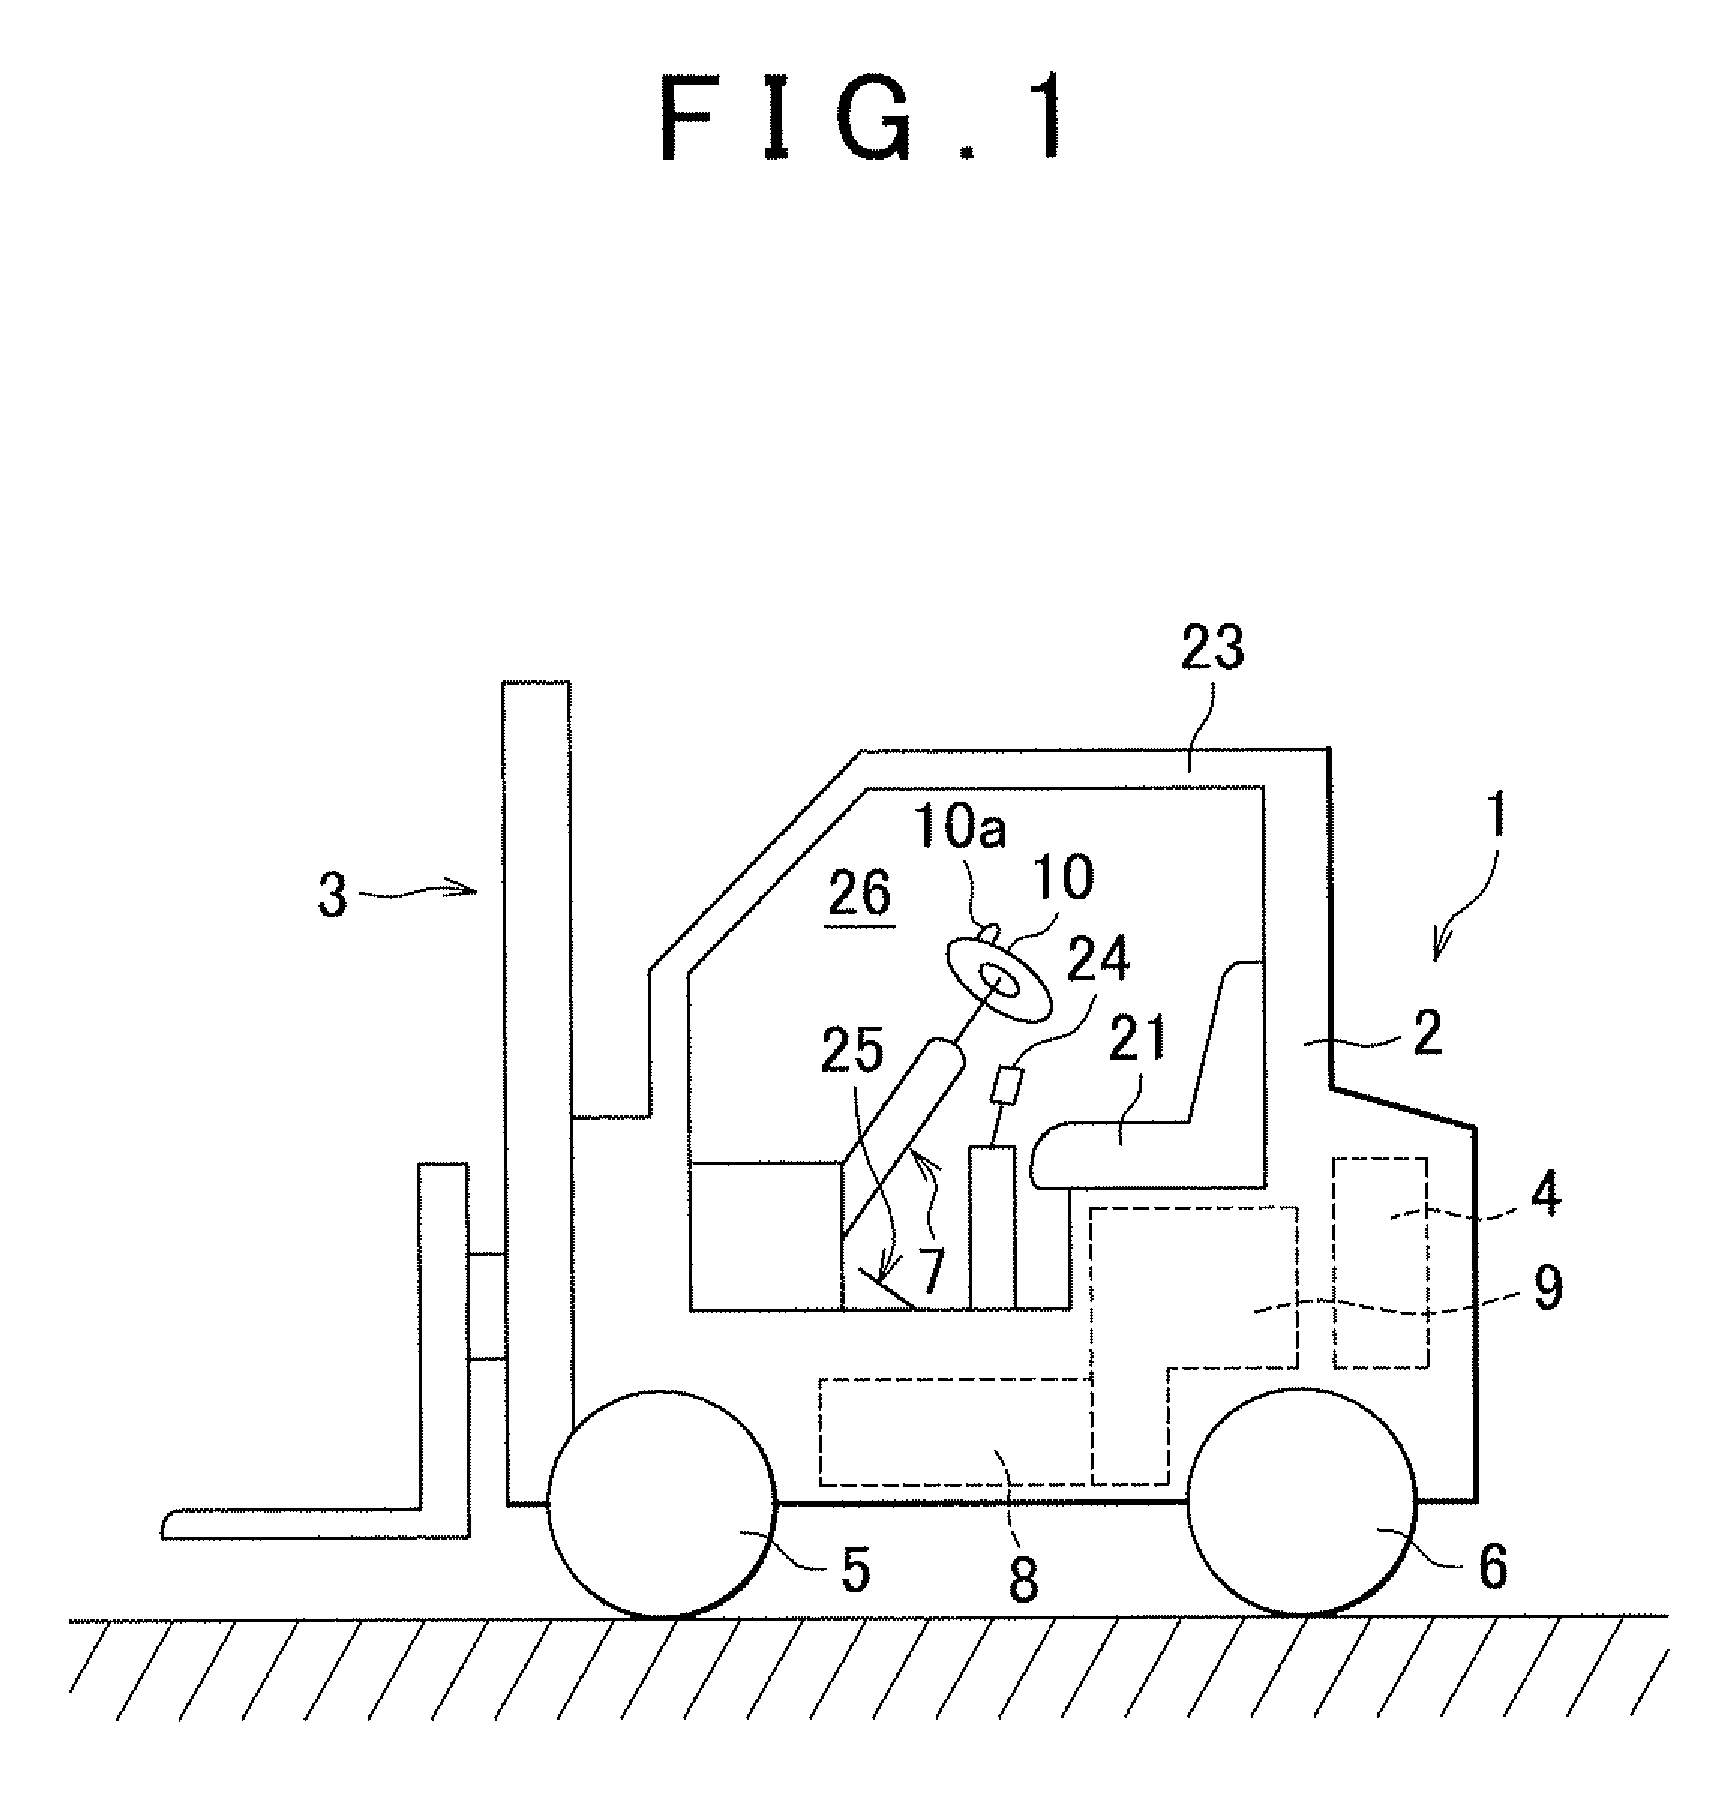 Control apparatus for steering mechanism